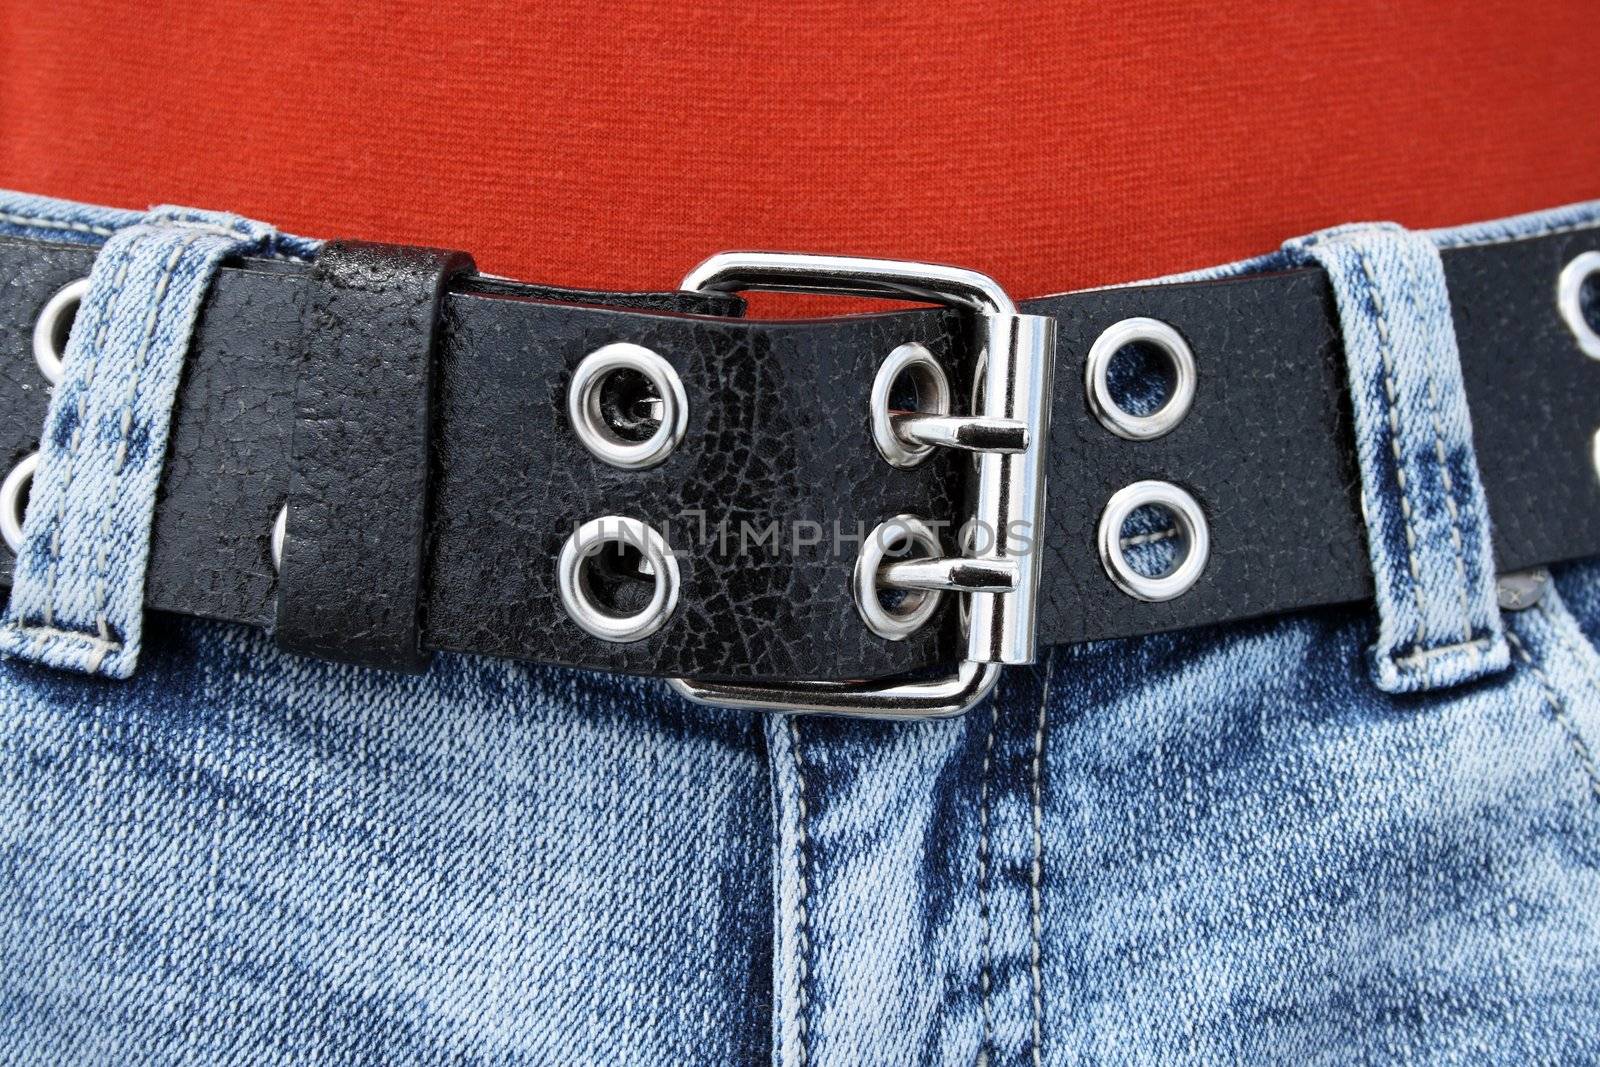 Black leather belt with metal buckle and blue jeans.